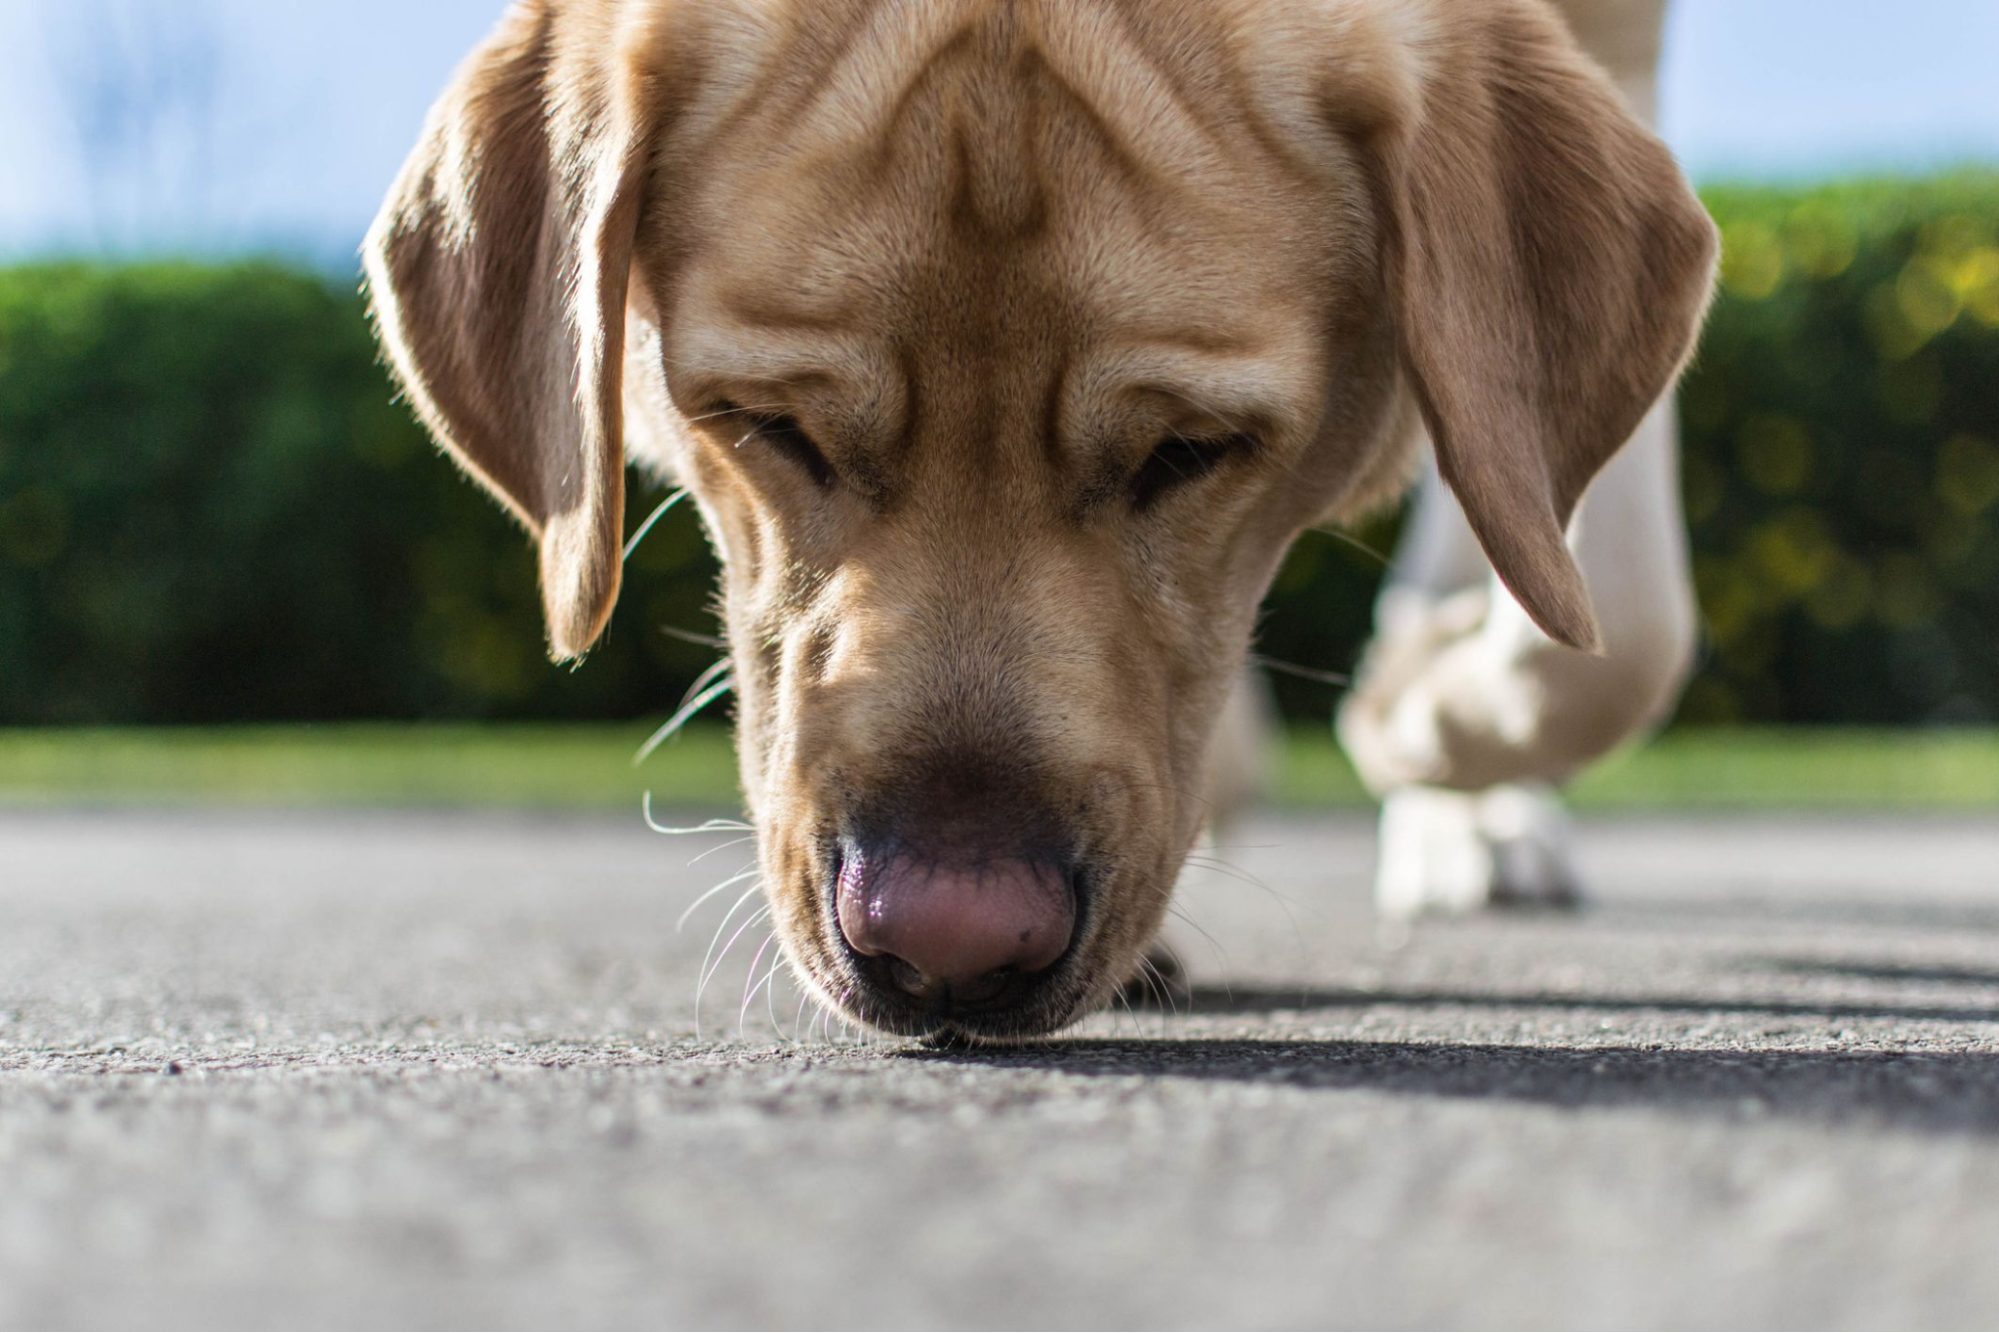 Scent games for dog: A labrador sniffing a treat 'breadcrumb' trail.